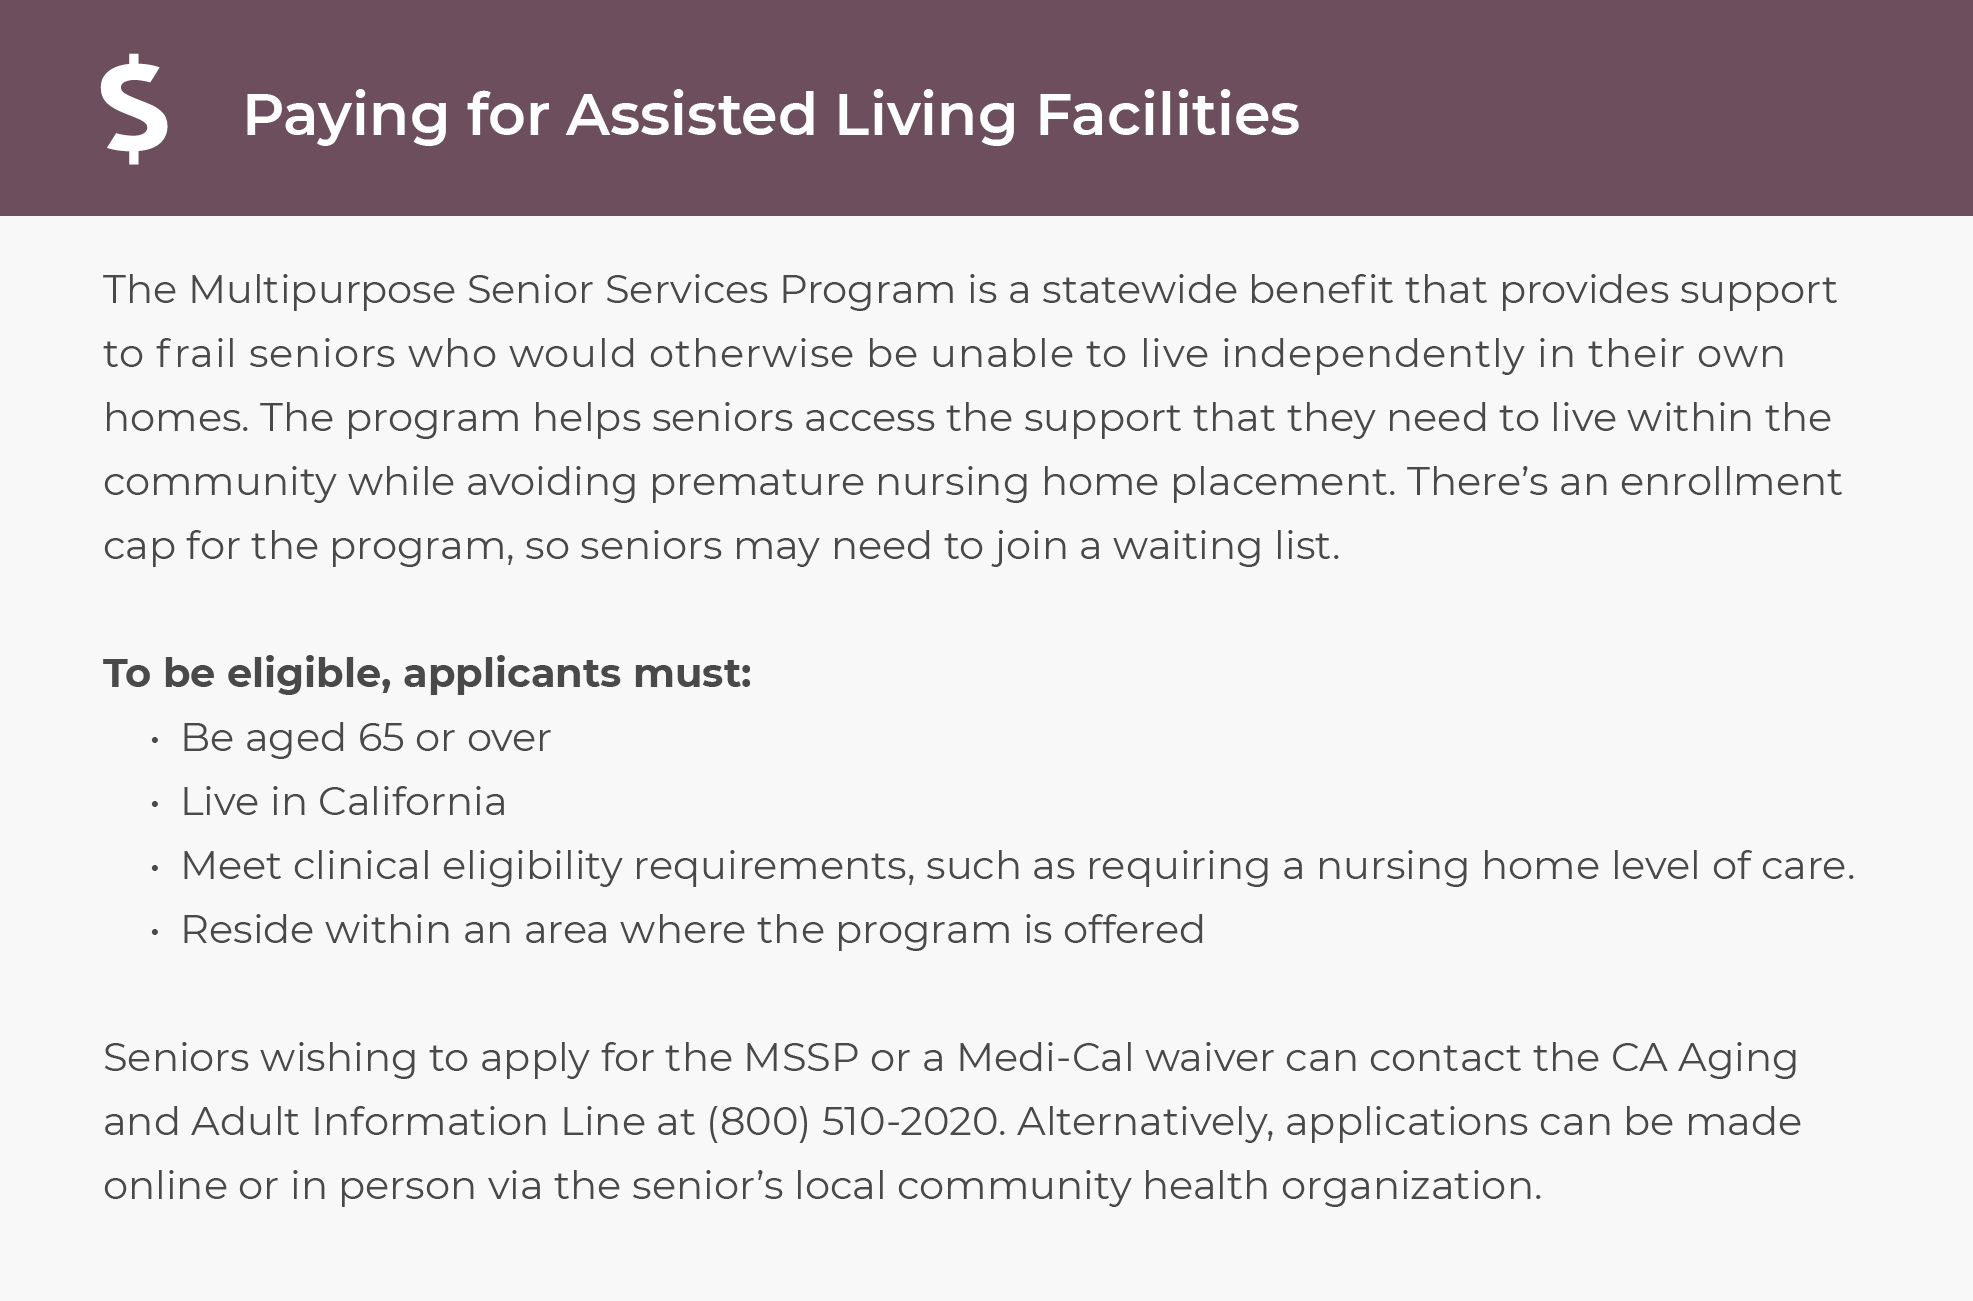 More ways to pay for assisted living in California